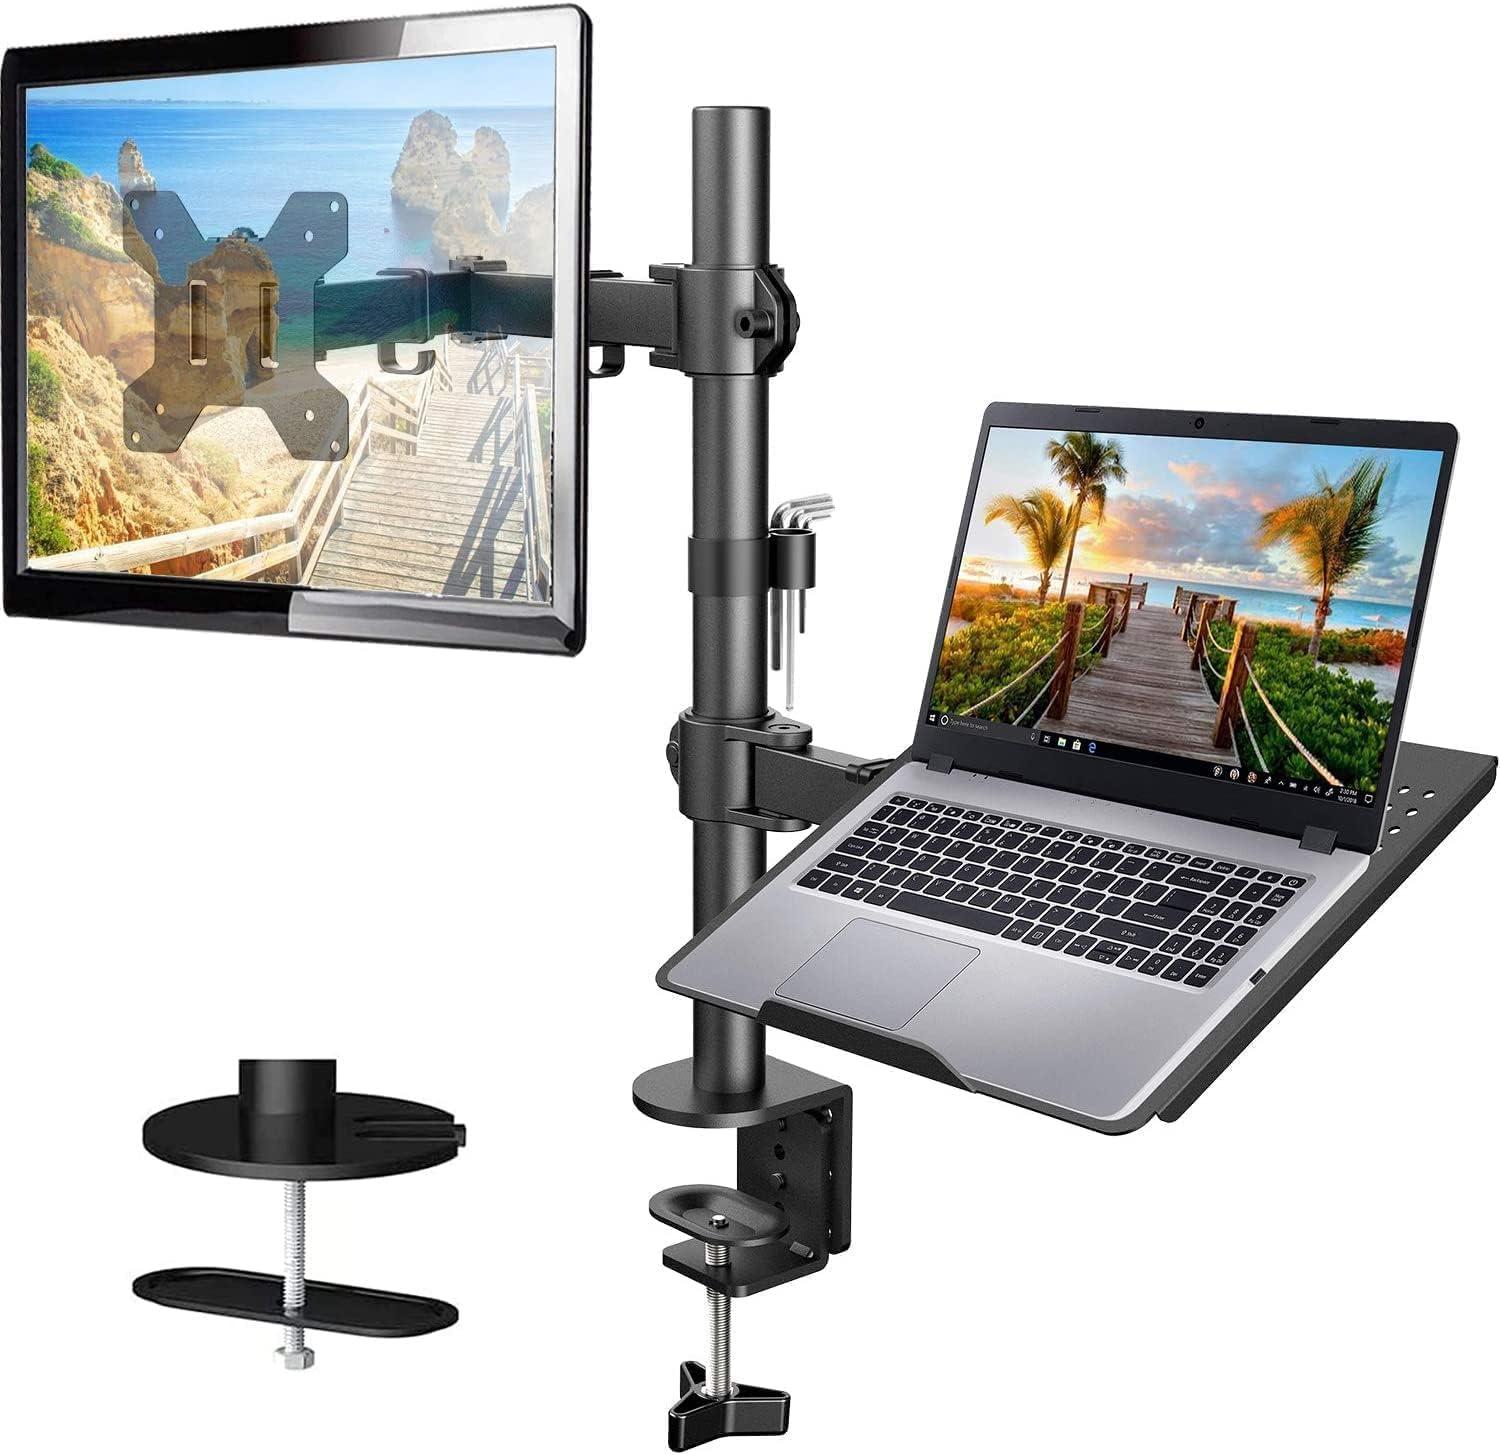 Adjustable Single Monitor Desk Mount with Laptop Tray for $23.99 Shipped